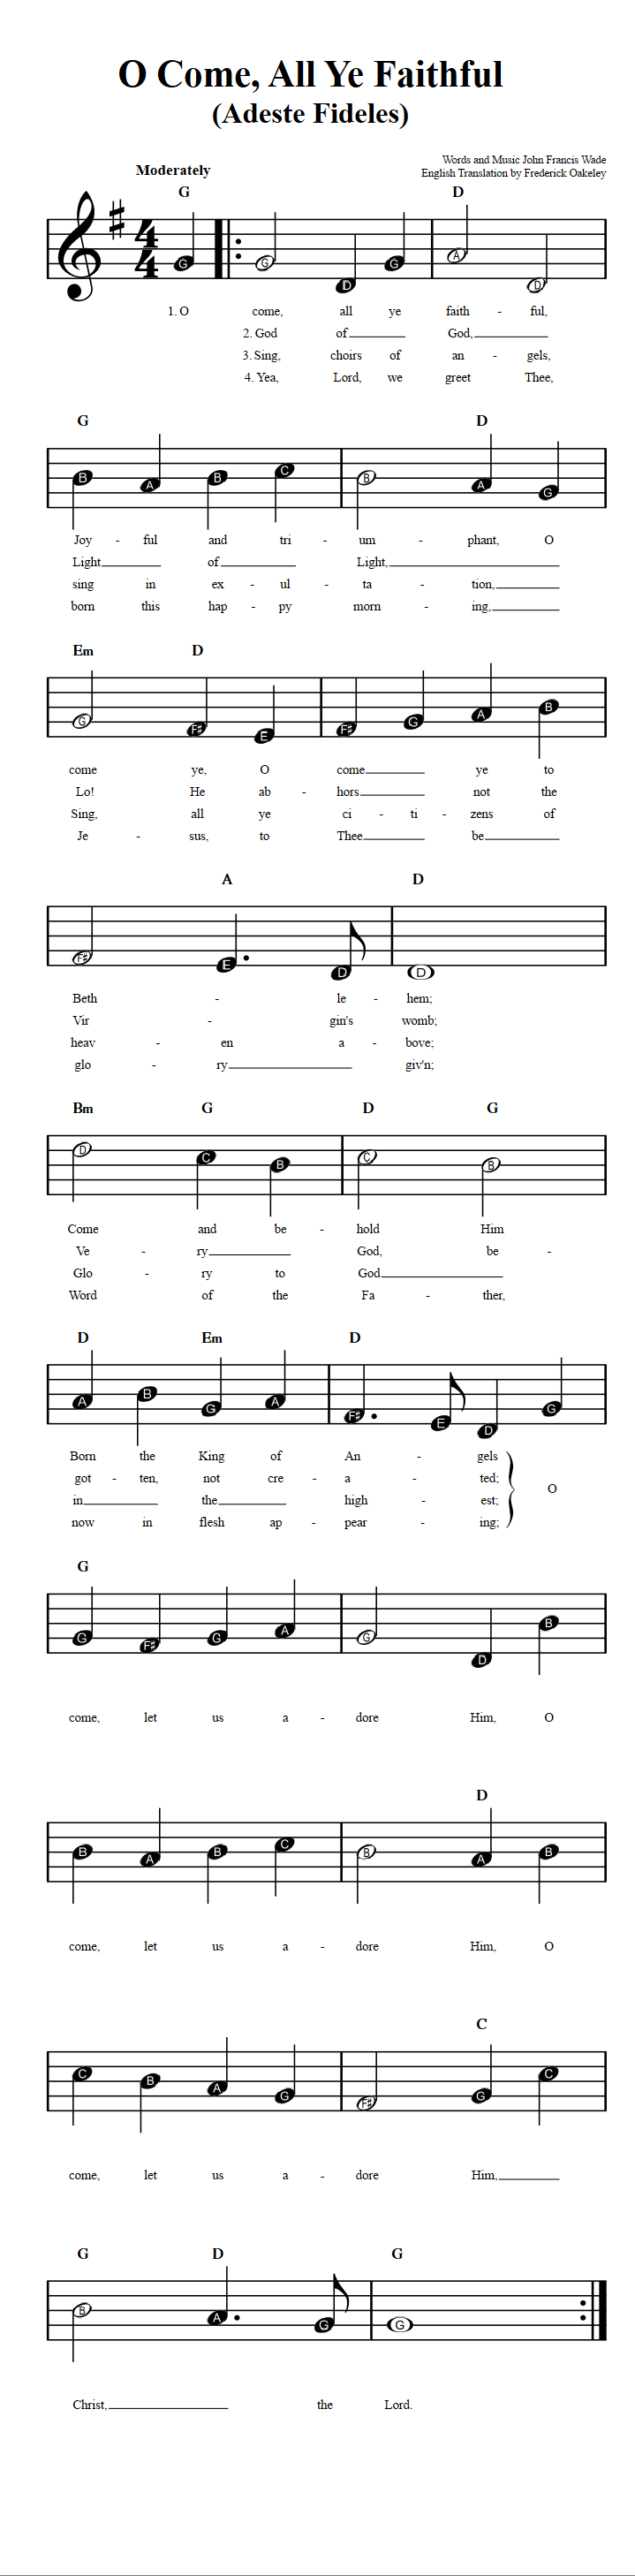 O Come All Ye Faithful: Beginner Sheet Music with Chords and Lyrics